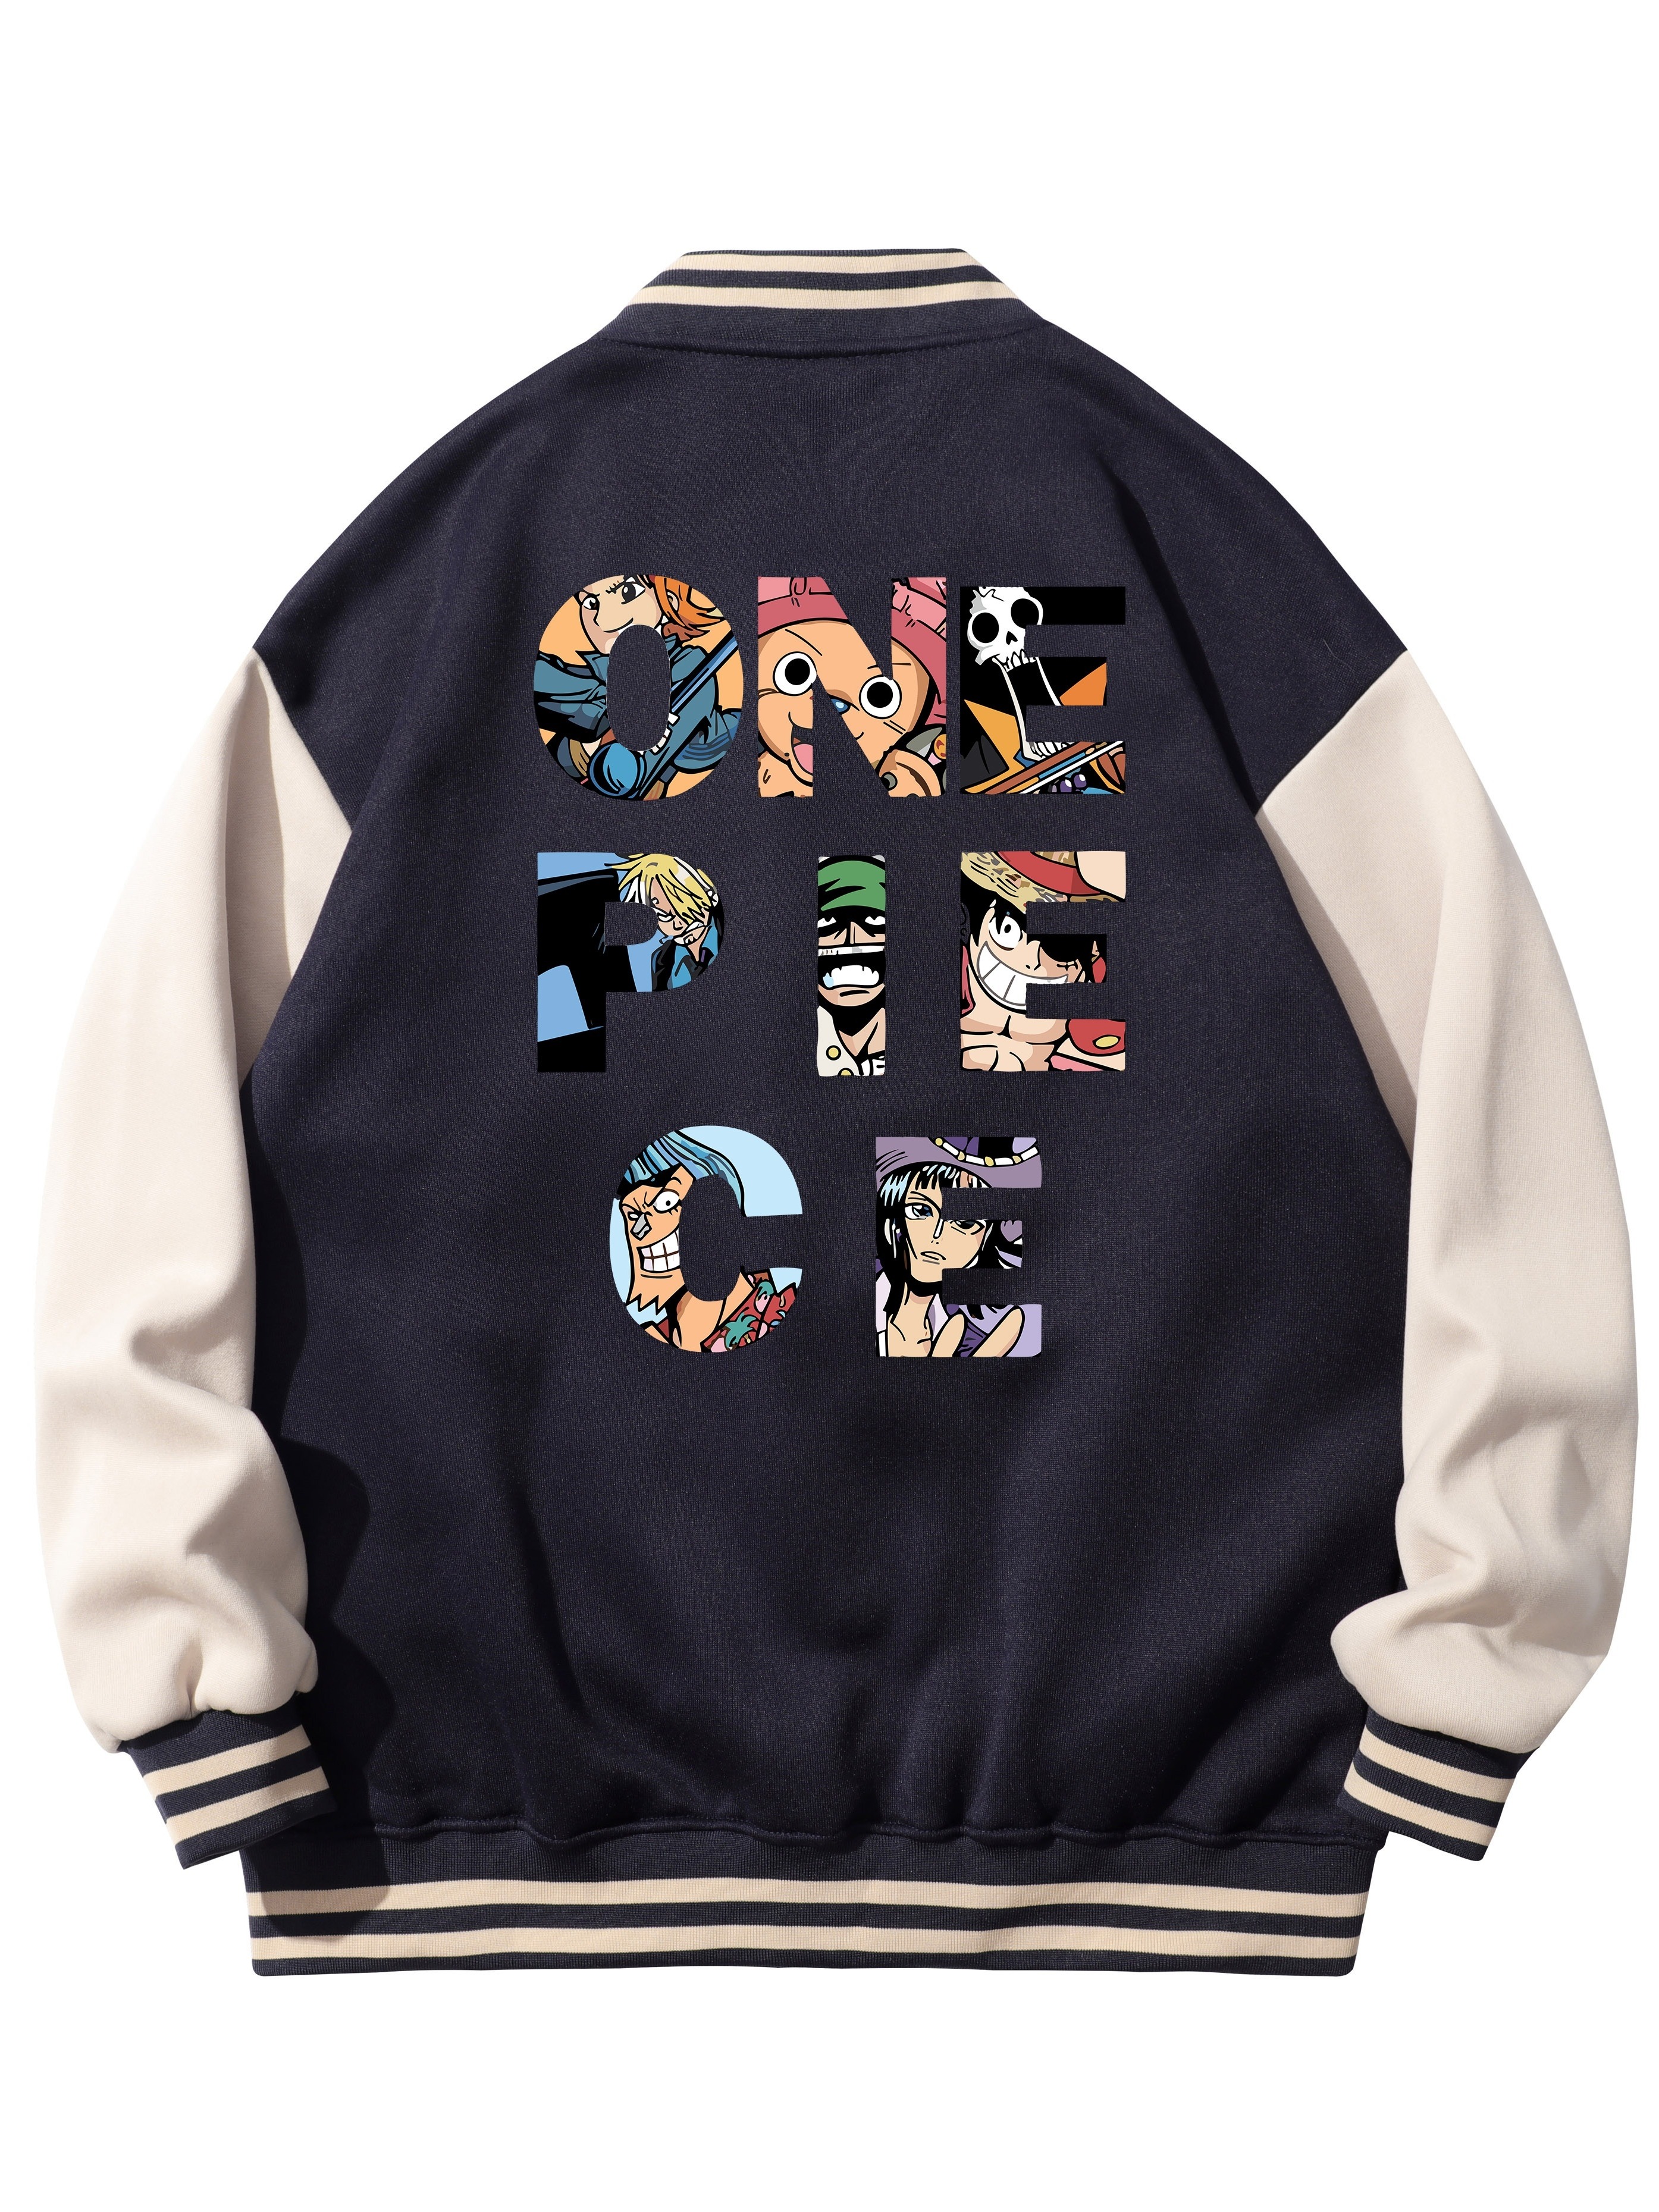 Fashionable “My Hero Academia” varsity jackets inspired by Midoriya Izuku  and Bakugo Katsuki are here! Check out the special designed rings with  their colors! | Anime Anime Global